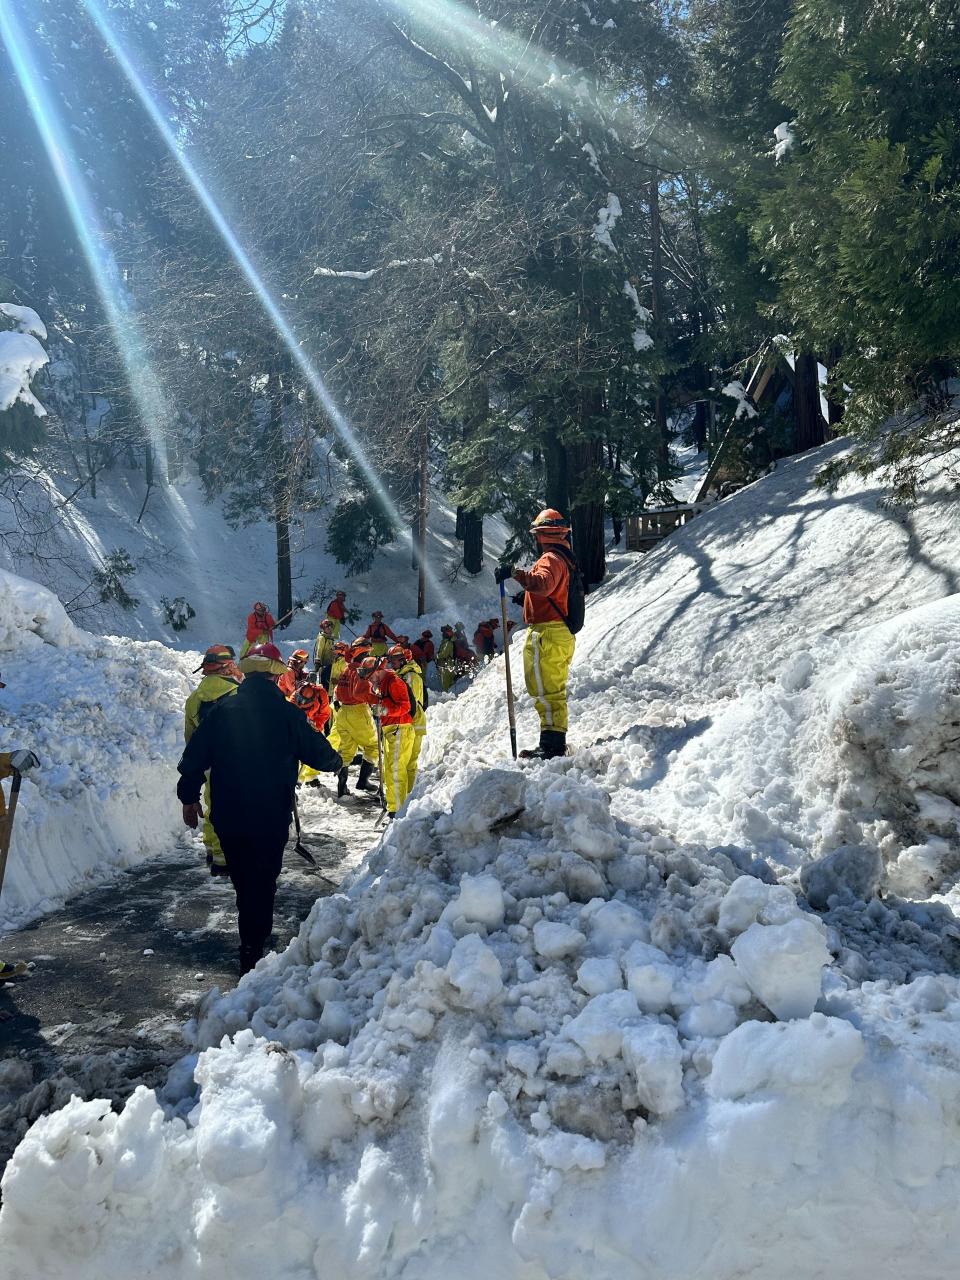 Cal Fire along with other agencies continue to work to restore vital services to residents affected by the recent storms in the local mountain communities.